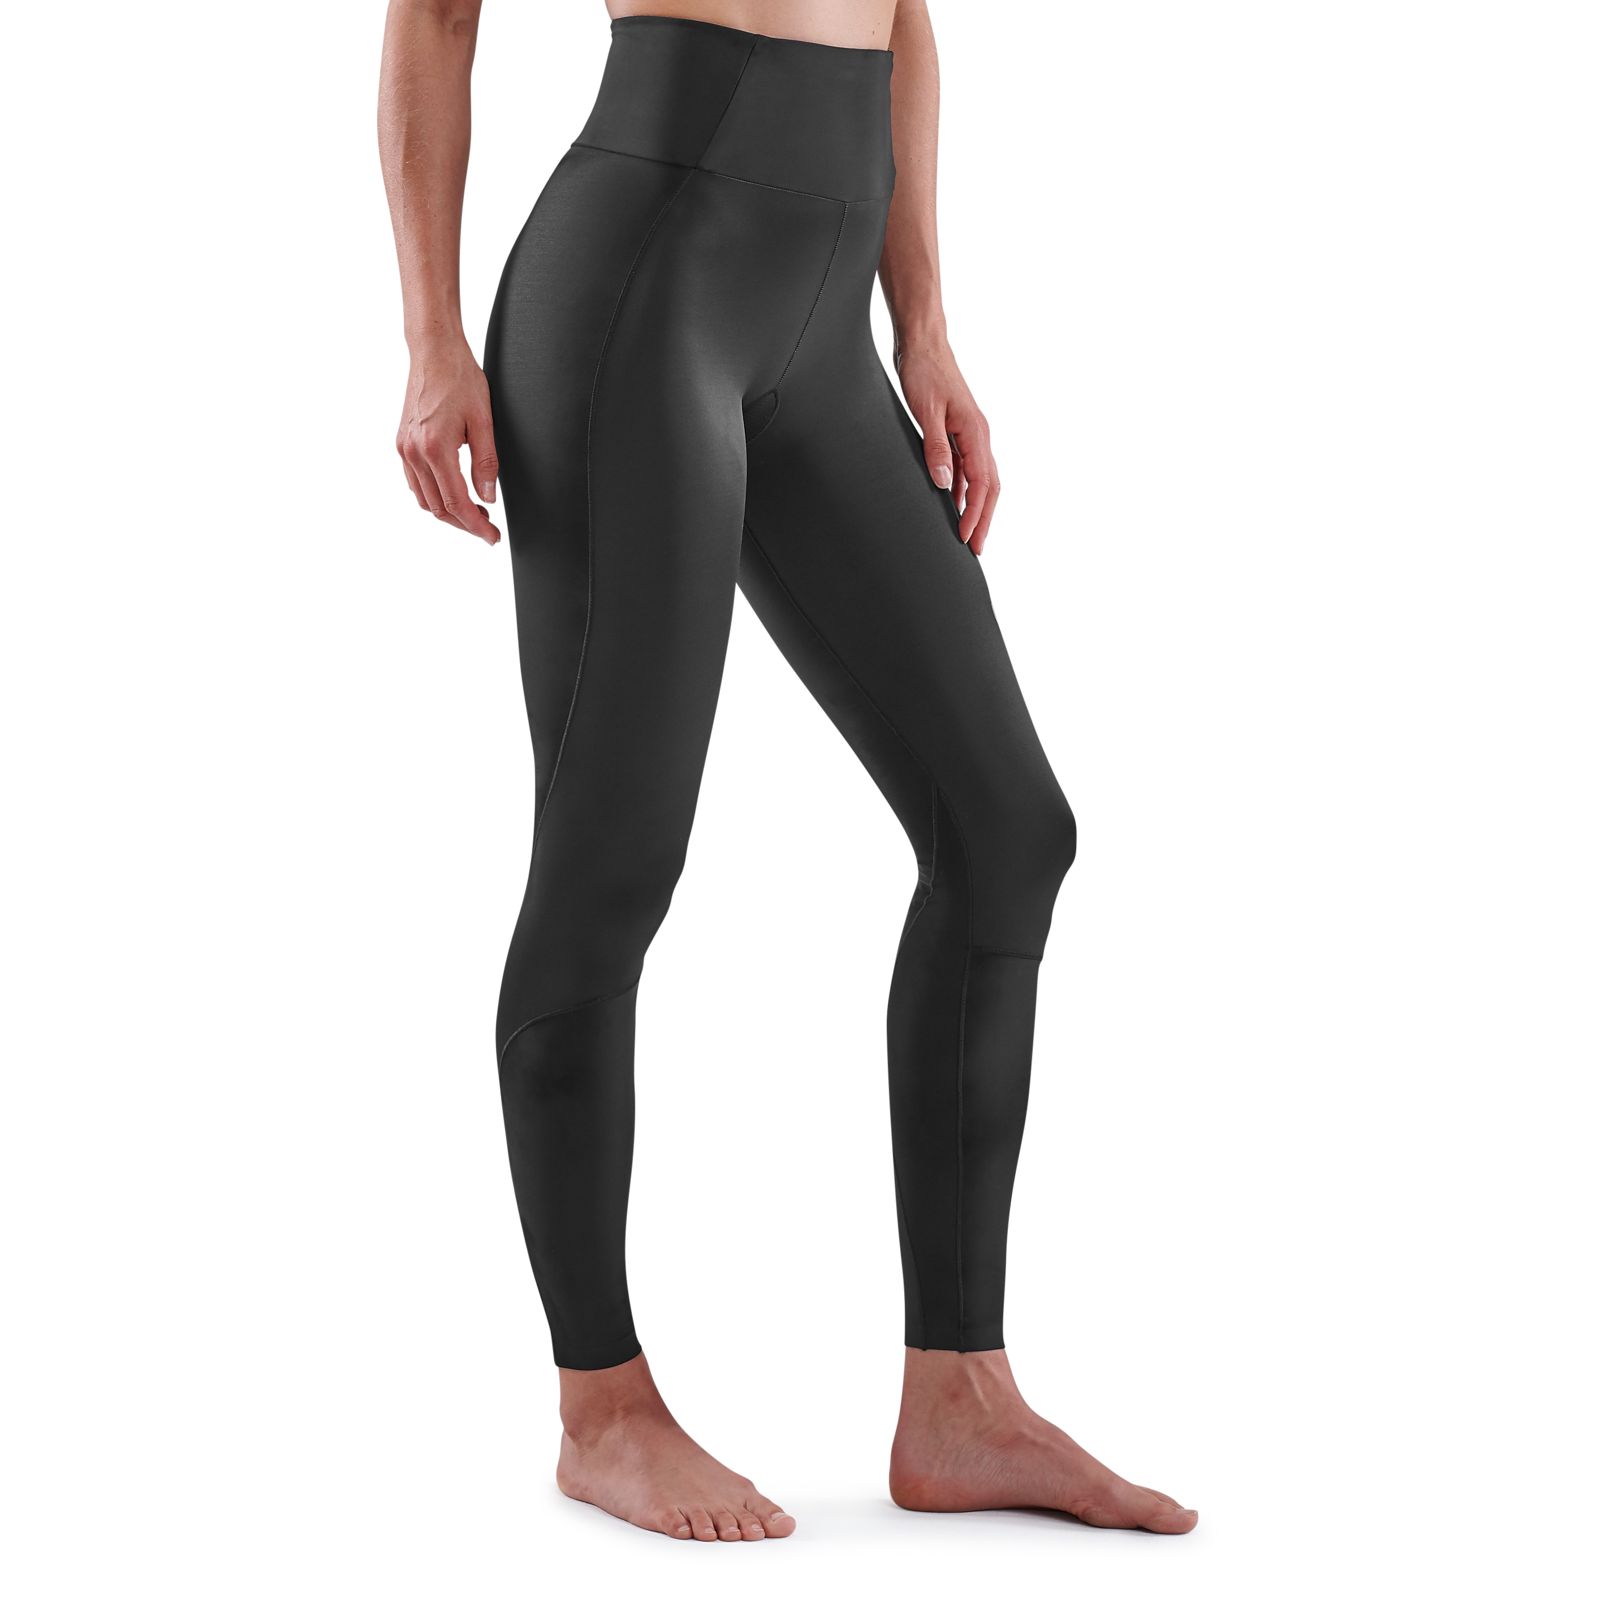 SKINS Women's A400 Compression 3/4 Tights, Black/Gold, Large, Pants -   Canada